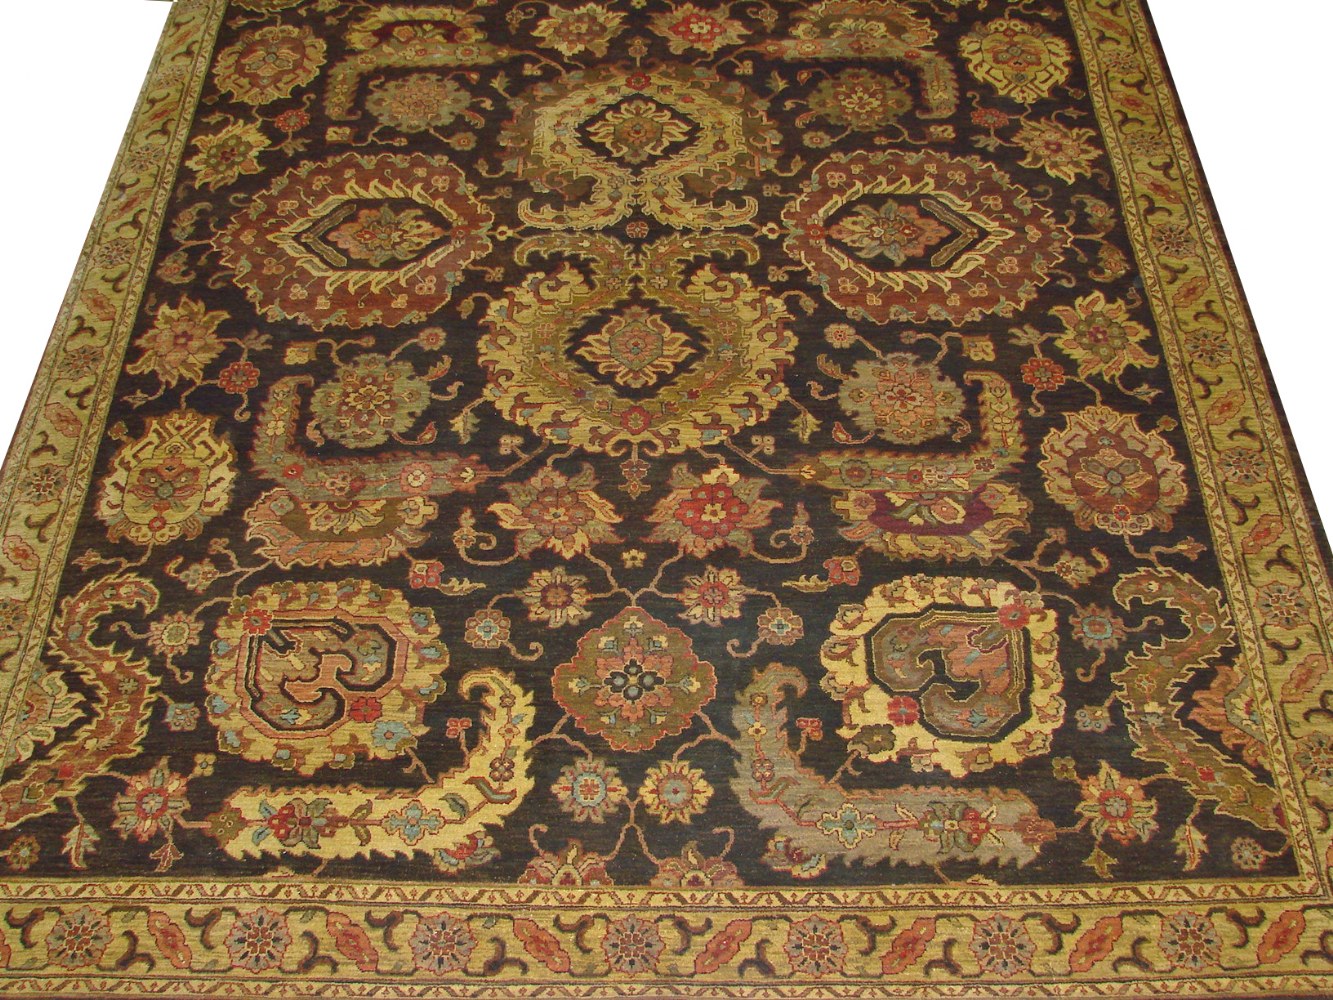 8x10 Antique Revival Hand Knotted Wool Area Rug - MR13737